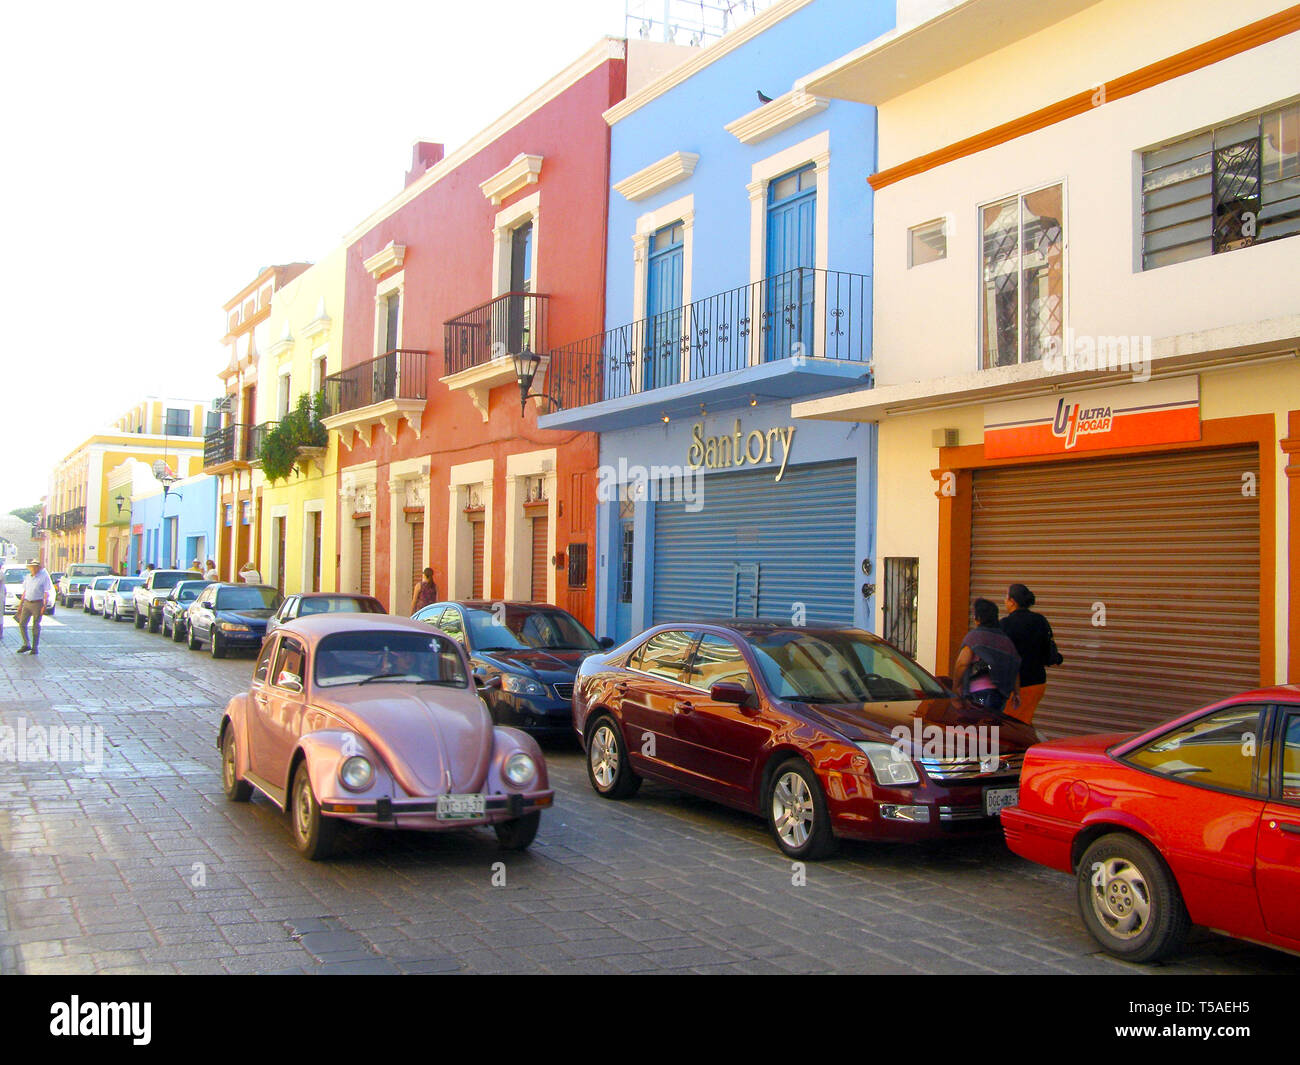 MERIDA, MEXICO 11 th March 2016: Street scene with colorful traditional old houses and old cars on street in Merida on hot sunny day. Big colonial cit Stock Photo